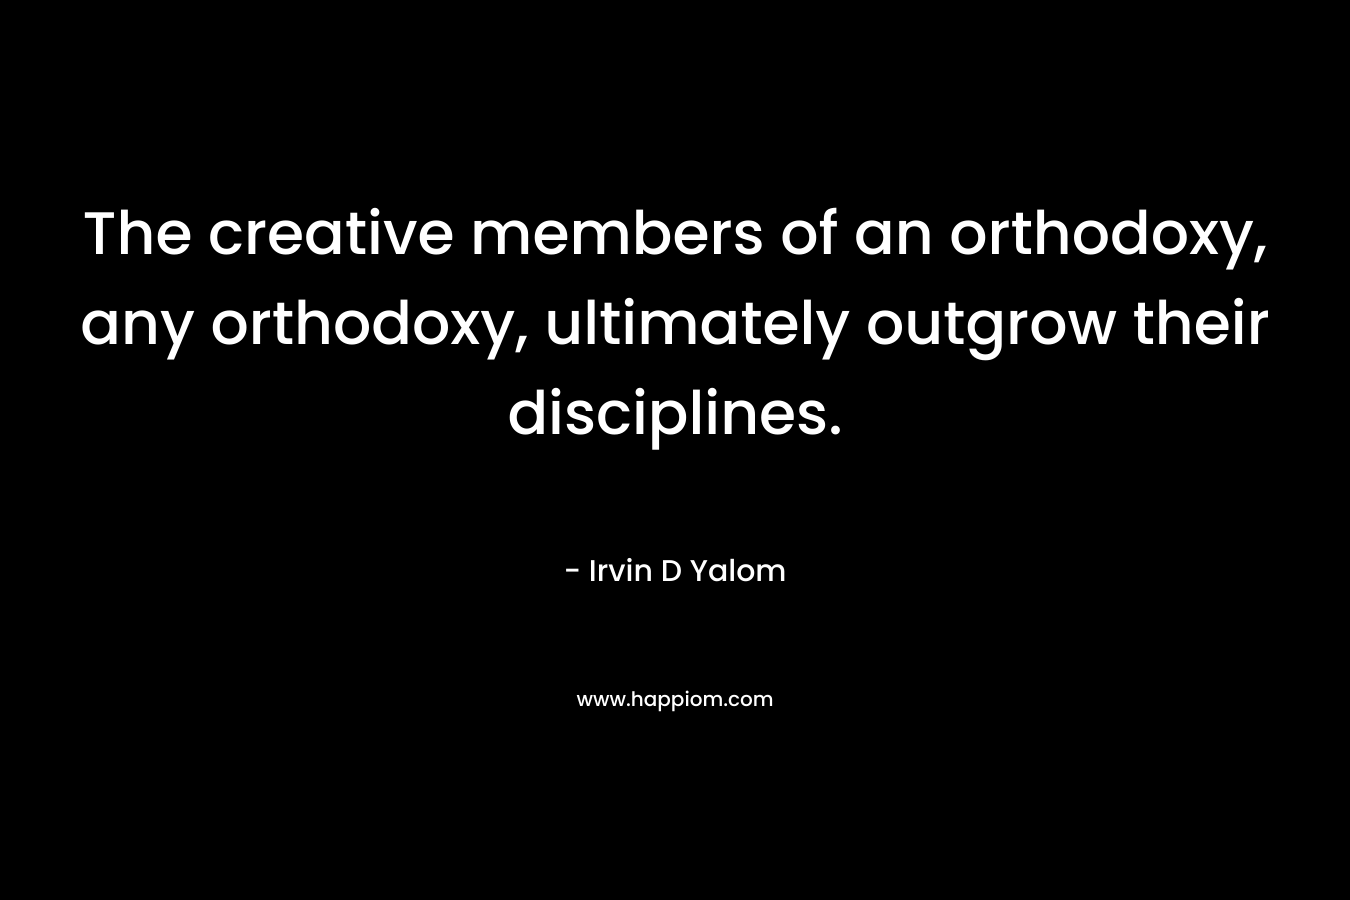 The creative members of an orthodoxy, any orthodoxy, ultimately outgrow their disciplines.